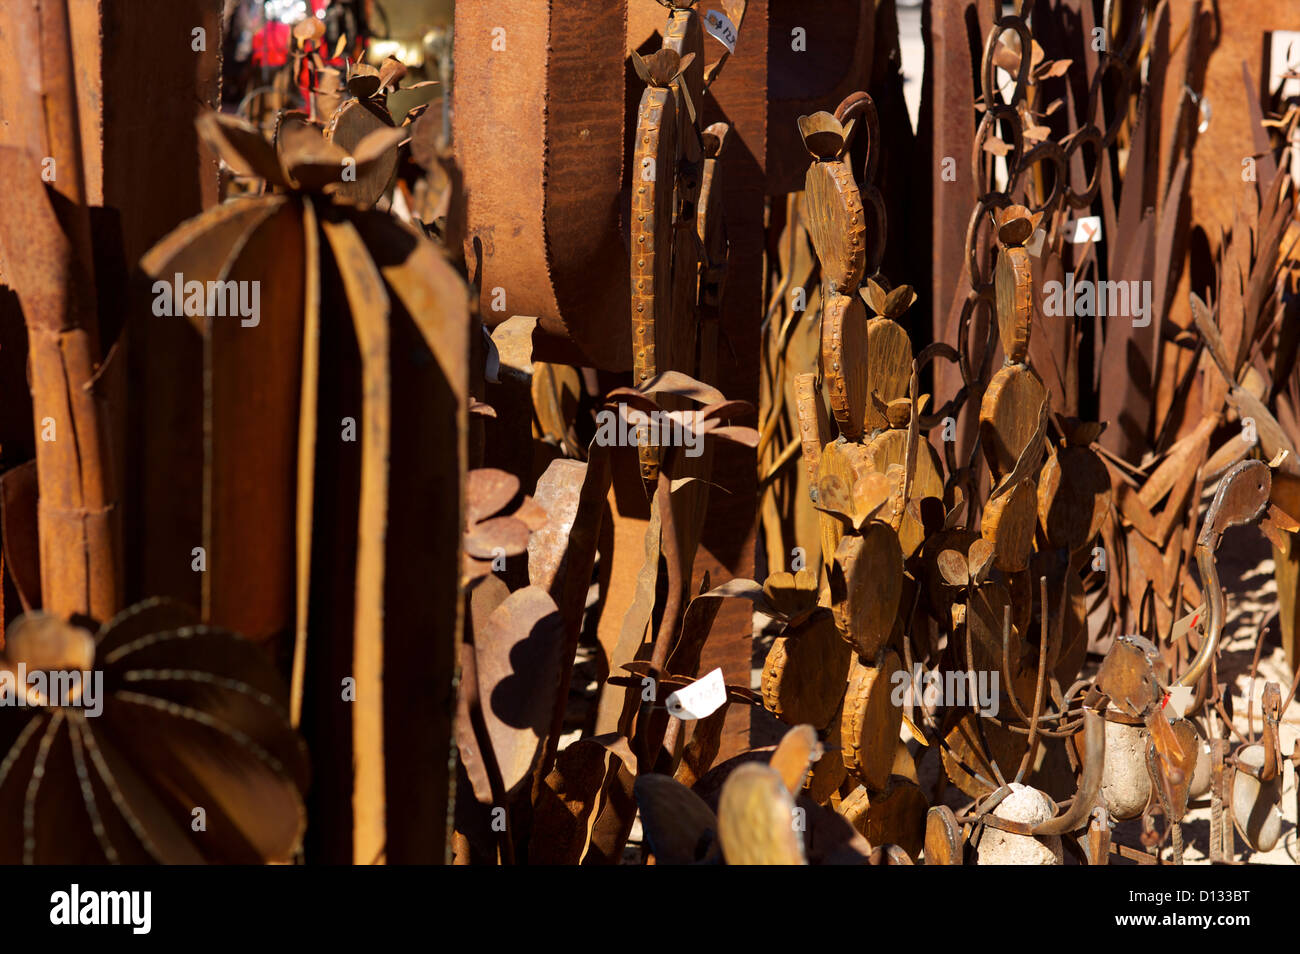 Variety of rusty objects for sale Stock Photo